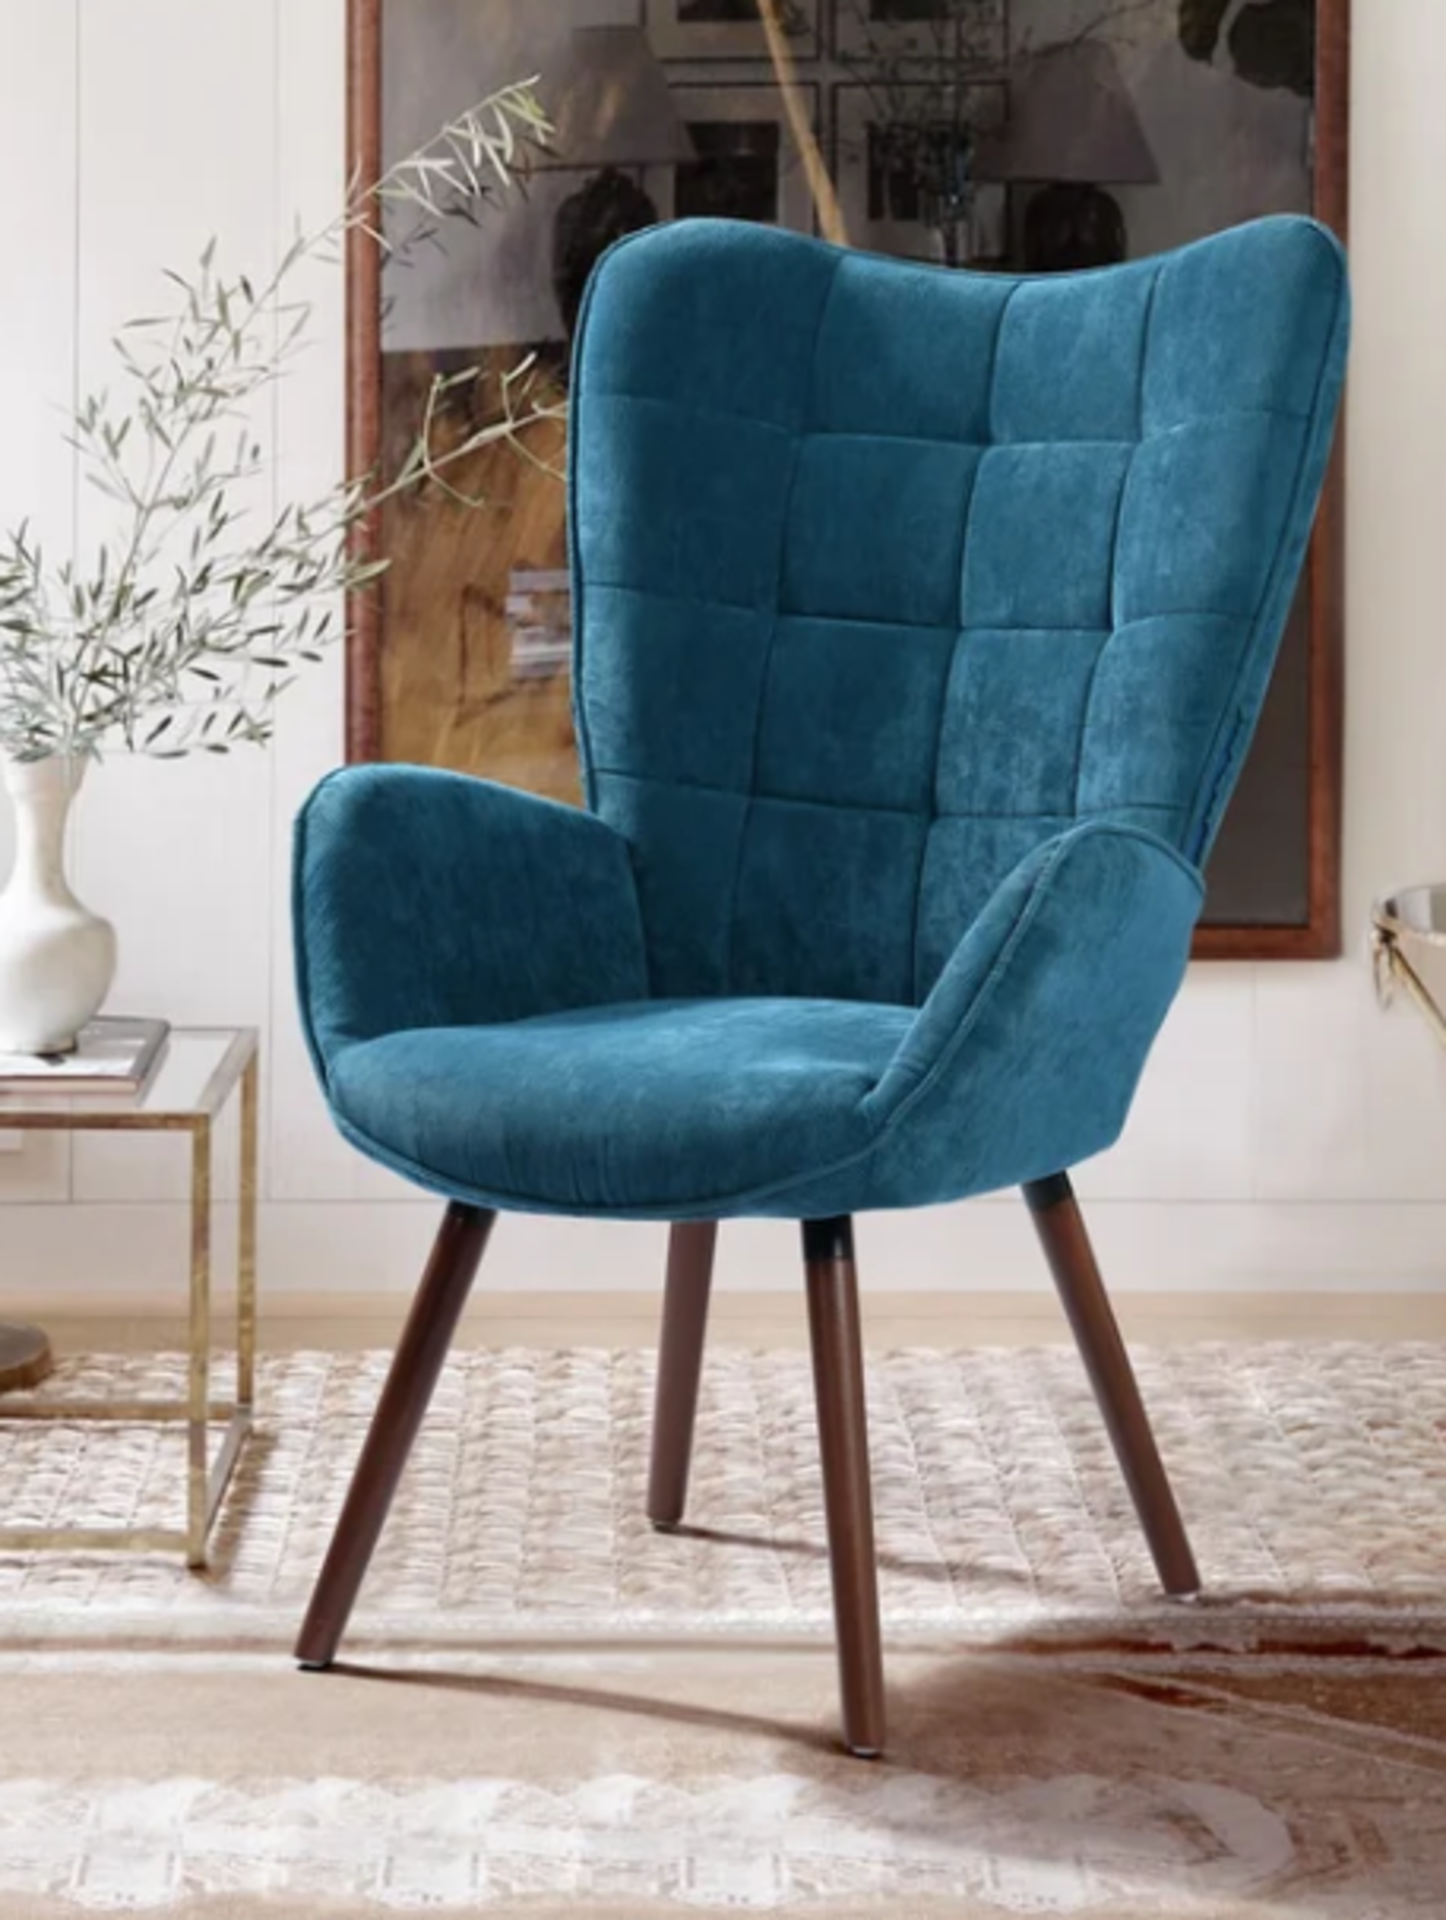 Abel Upholstered Armchair. The corduroy upholstery adds warmth and texture to a room while also